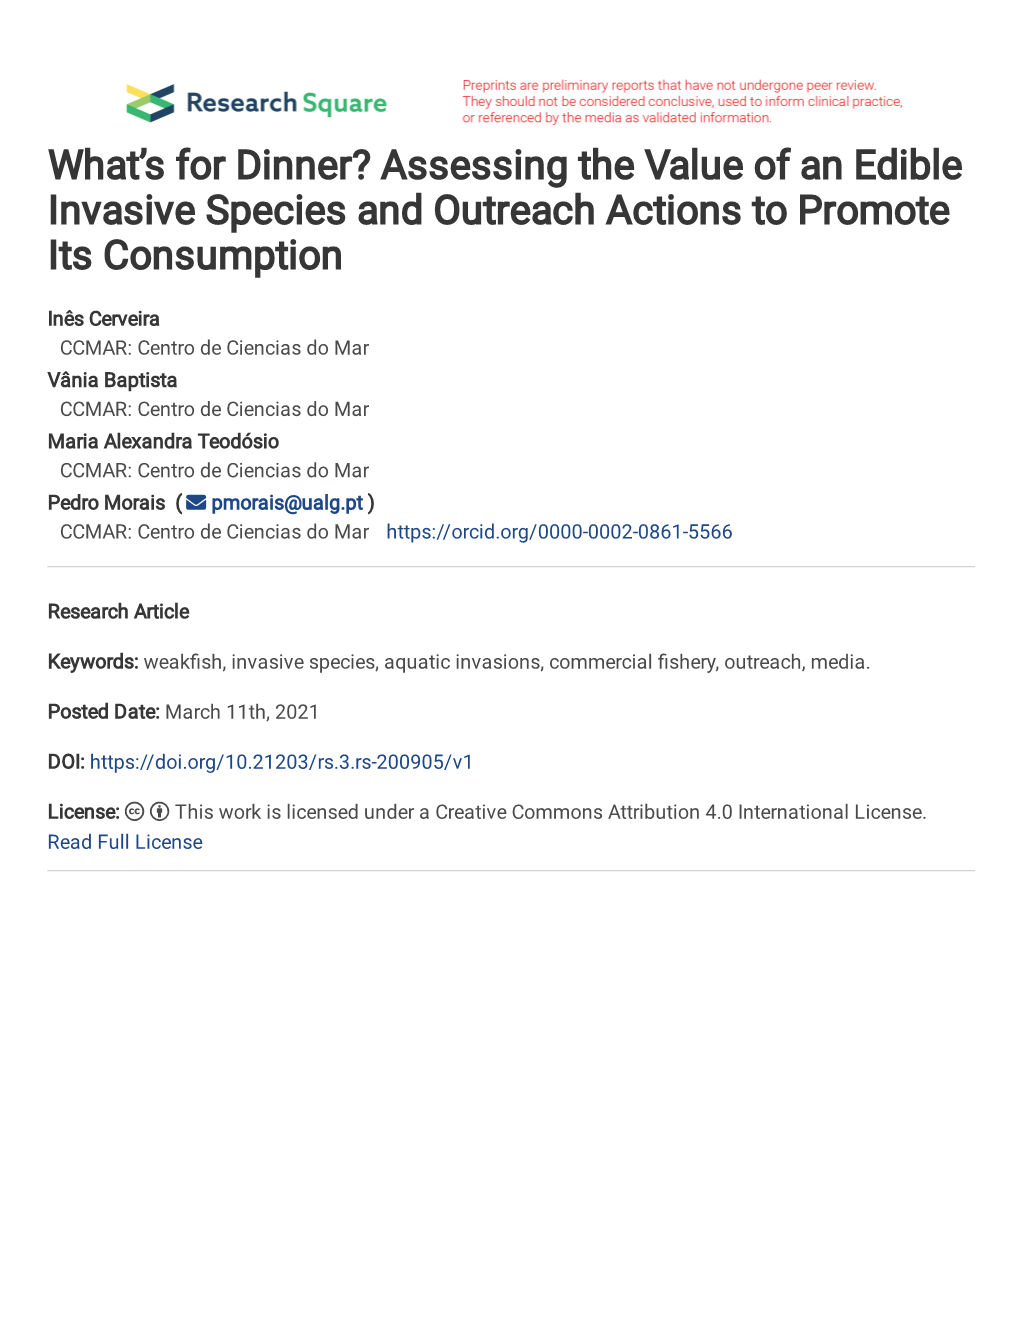 Assessing the Value of an Edible Invasive Species and Outreach Actions to Promote Its Consumption